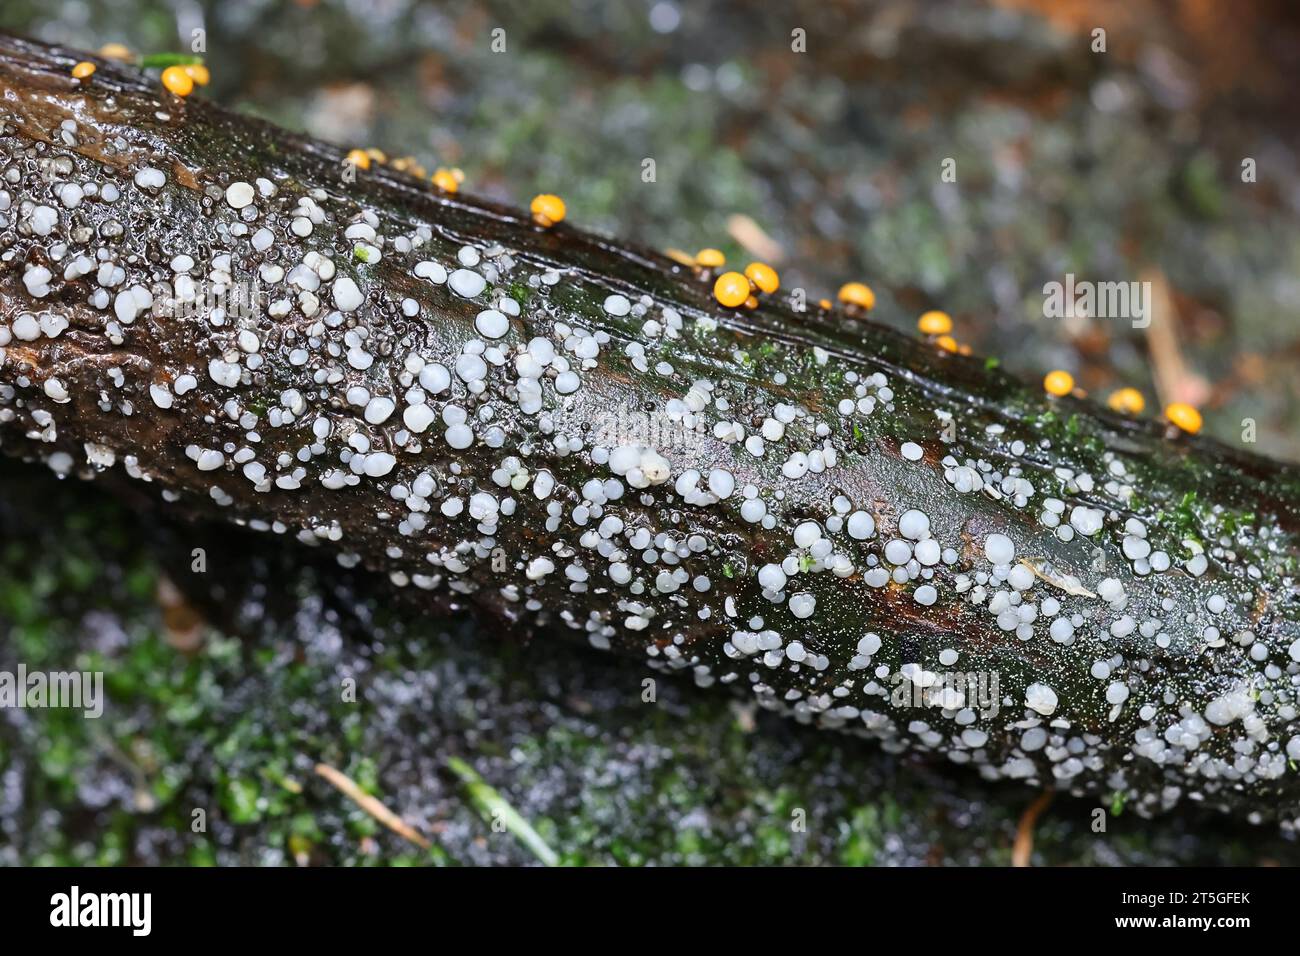 Mollisia ventosa, grey disco fungus growing on wet wood, cup fungus from Finland Stock Photo